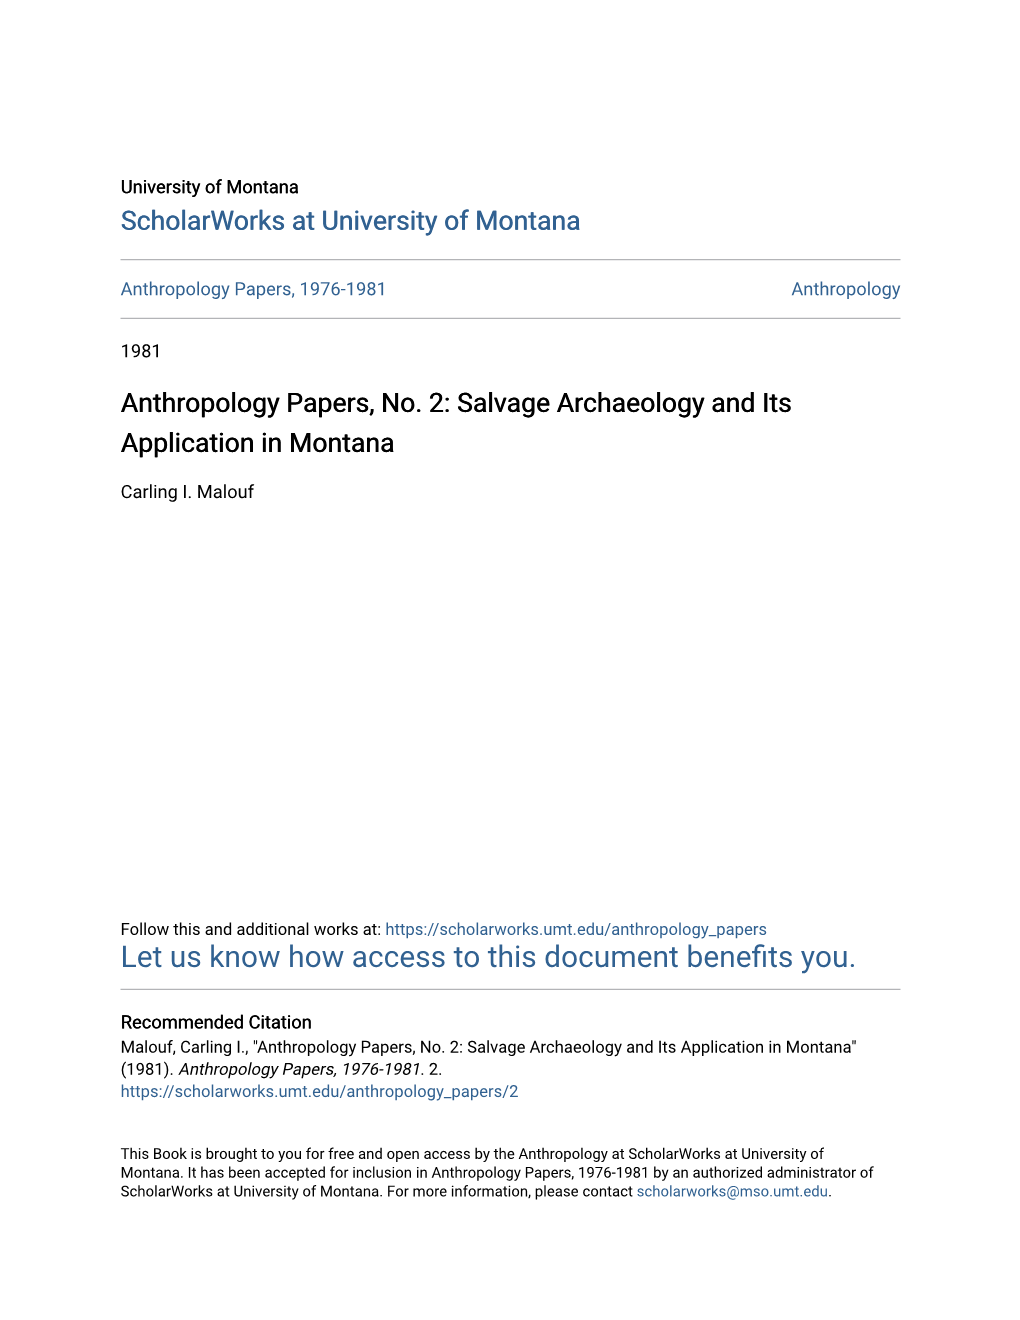 Anthropology Papers, No. 2: Salvage Archaeology and Its Application in Montana